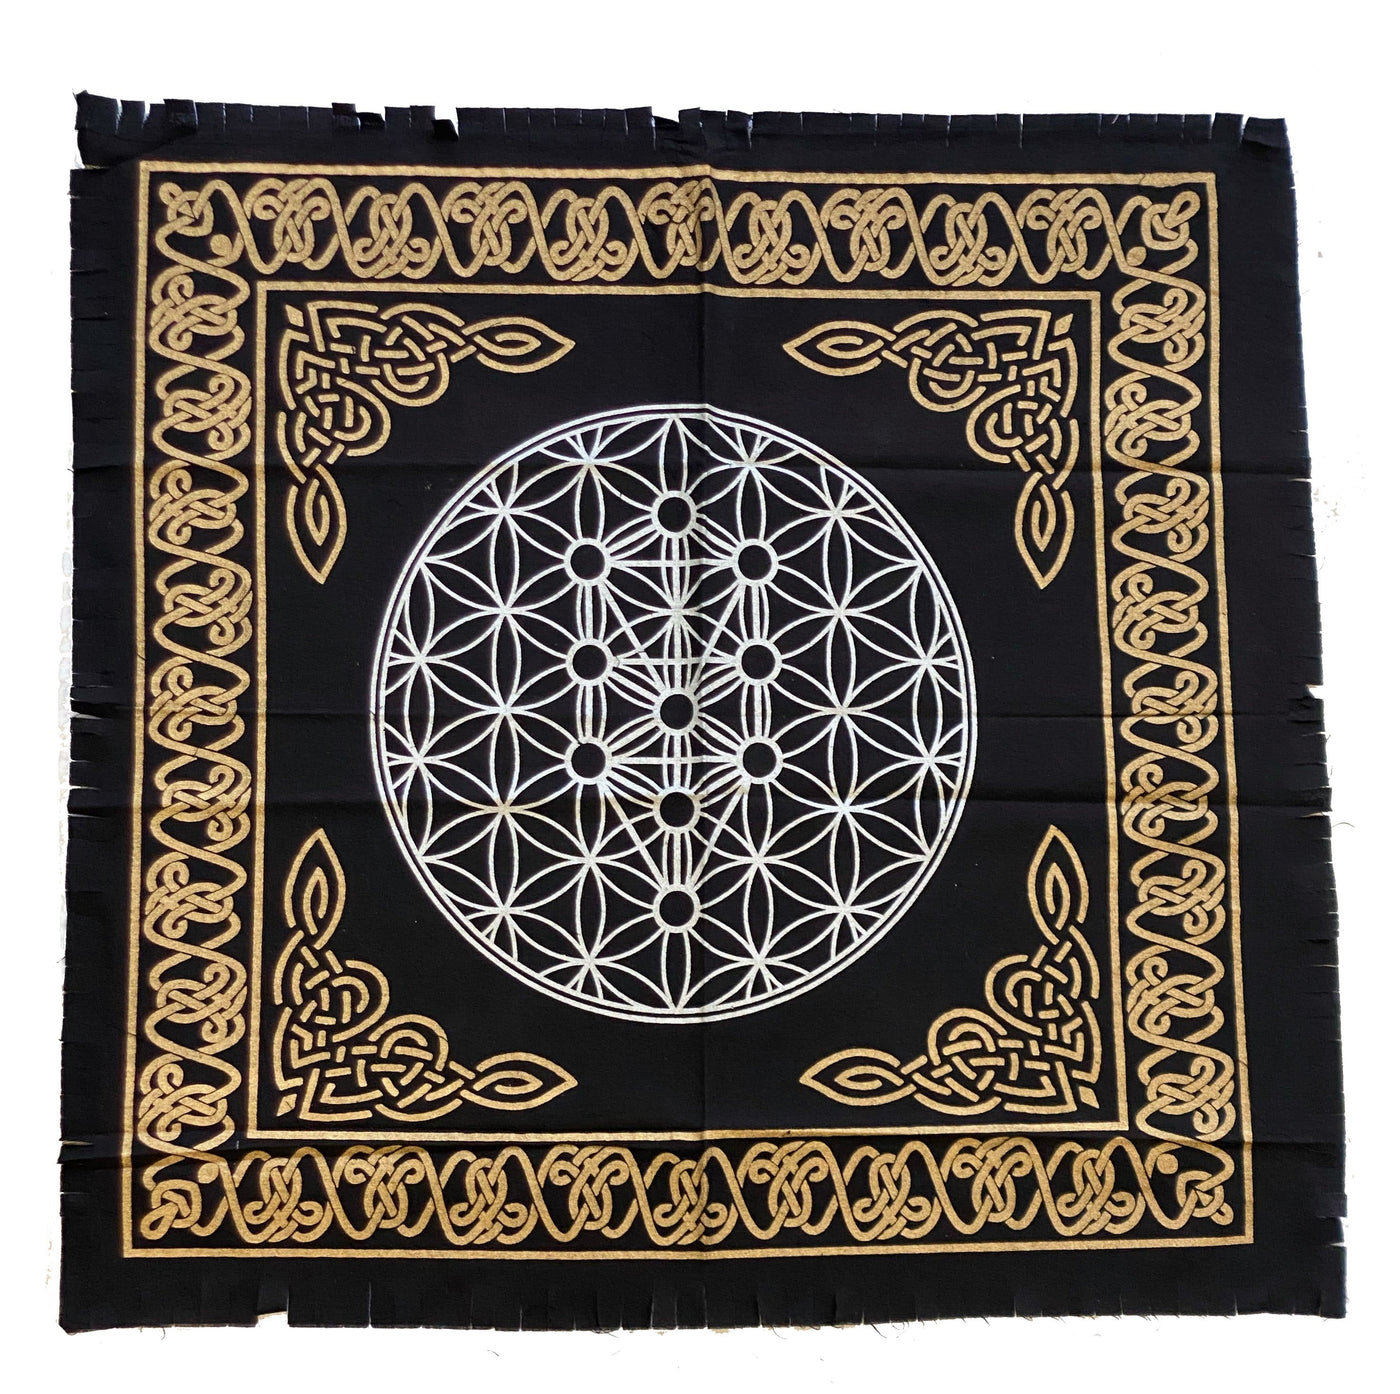 flower of life alter grid. It is black with a white grid imprinted on it and gold borders and corners.